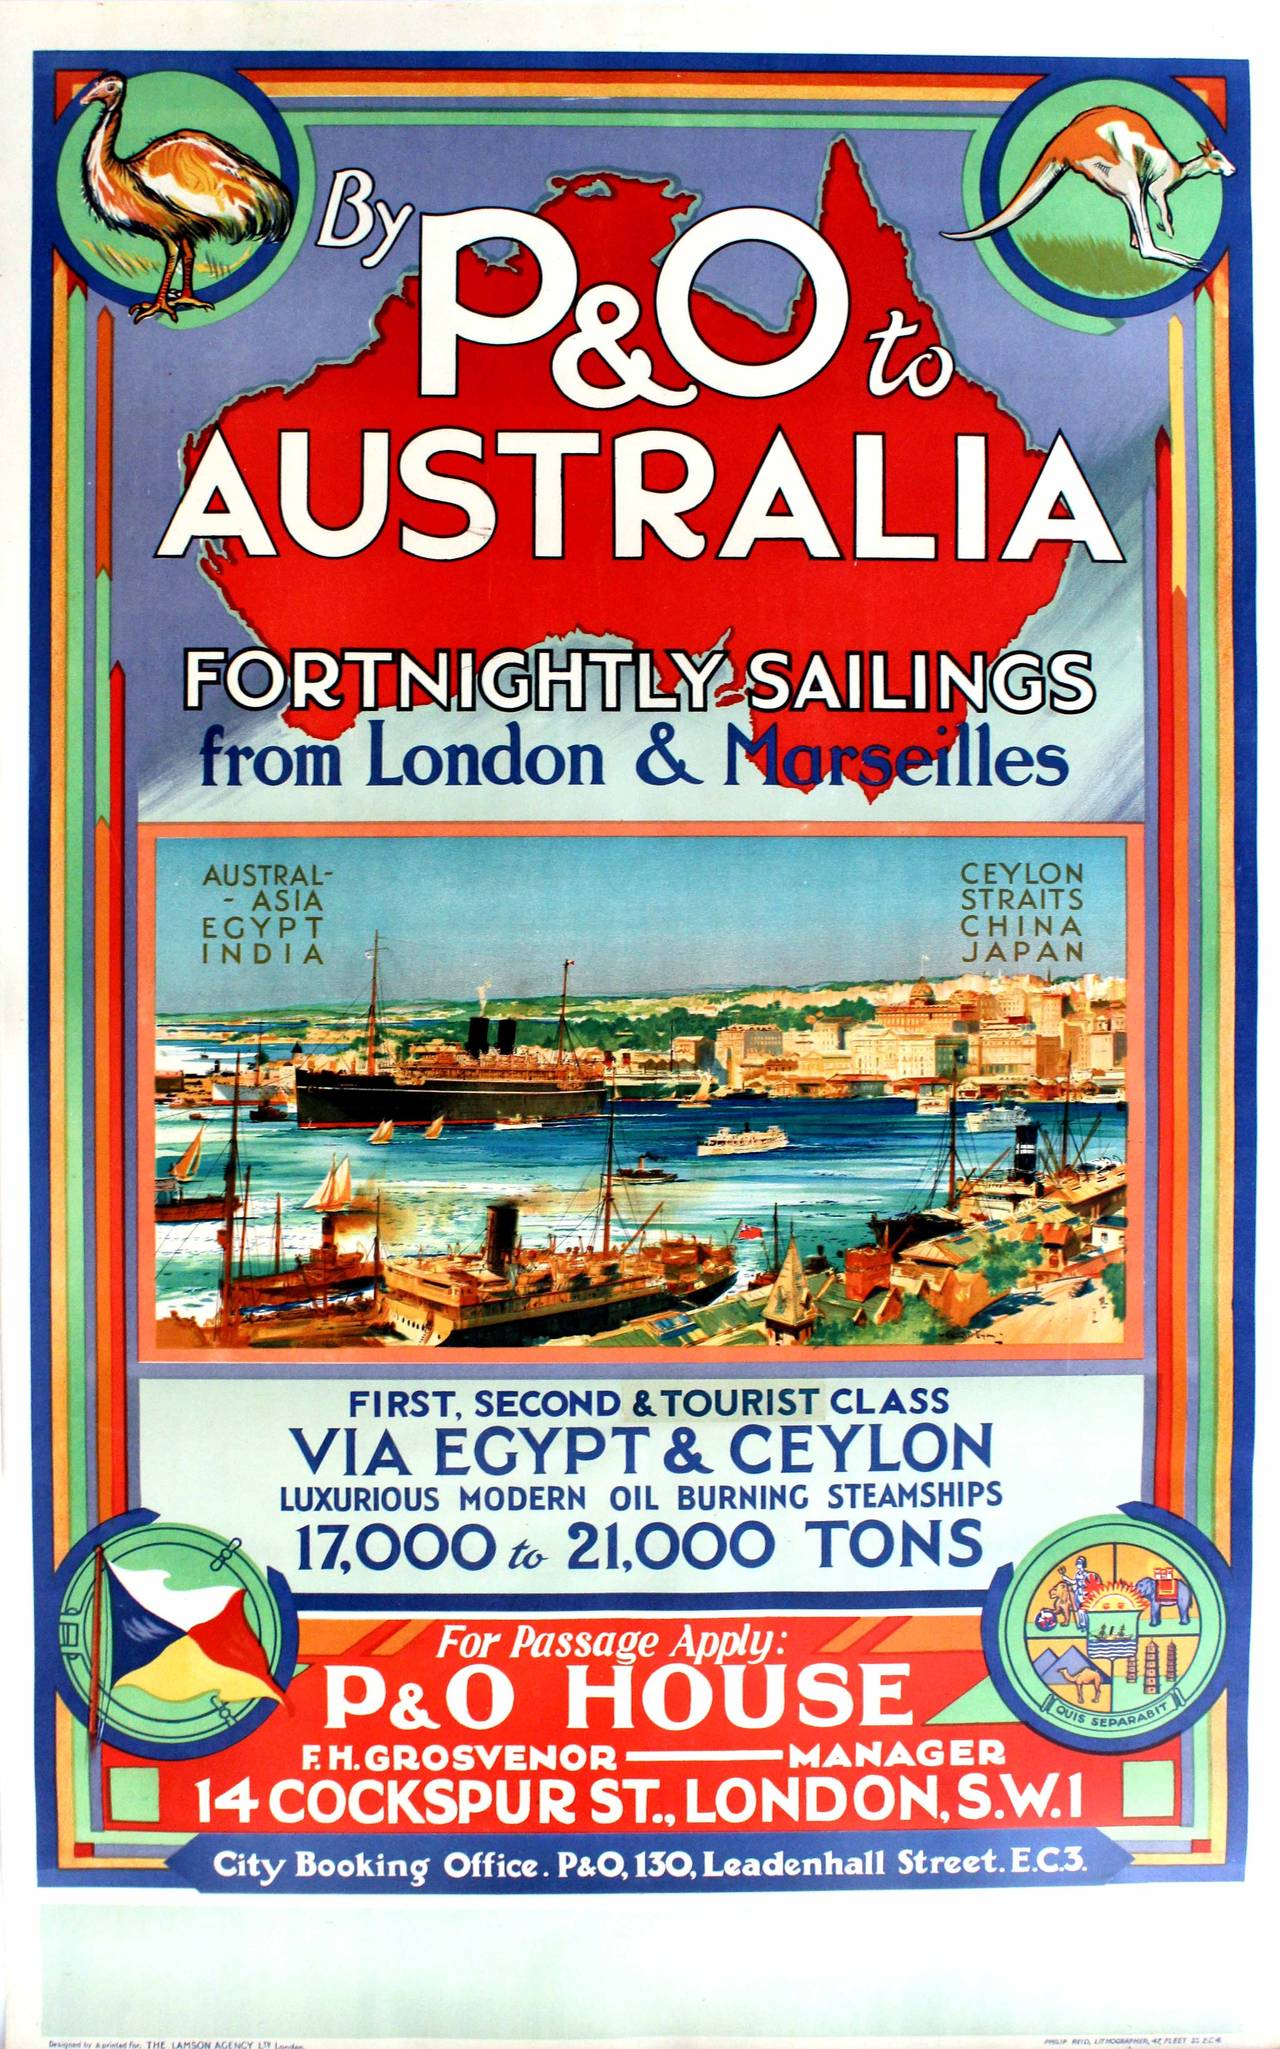 Unknown Print - Original Cruise Advertising Poster: By P&O To Australia From London & Marseilles